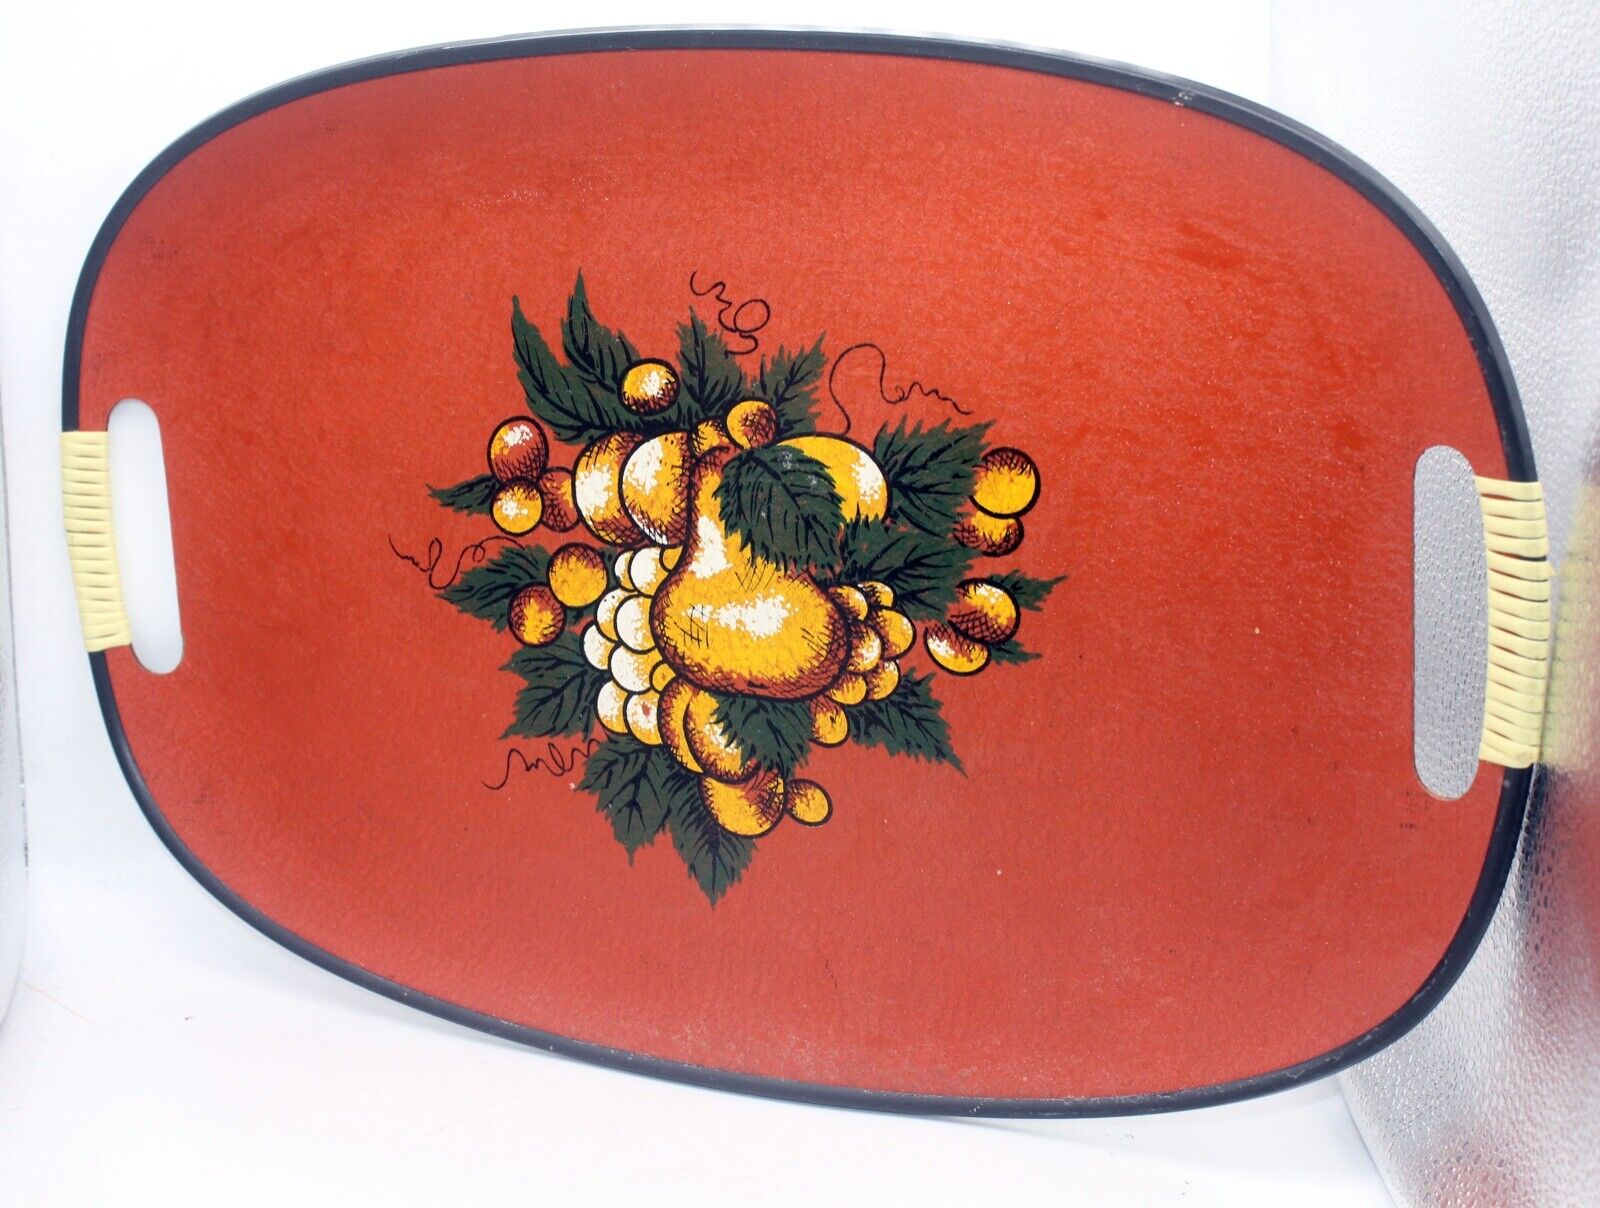 Vintage EVERBRIGHT LACQUERWARE Serving Tray Mid Century Modern Japan Fruit Motif